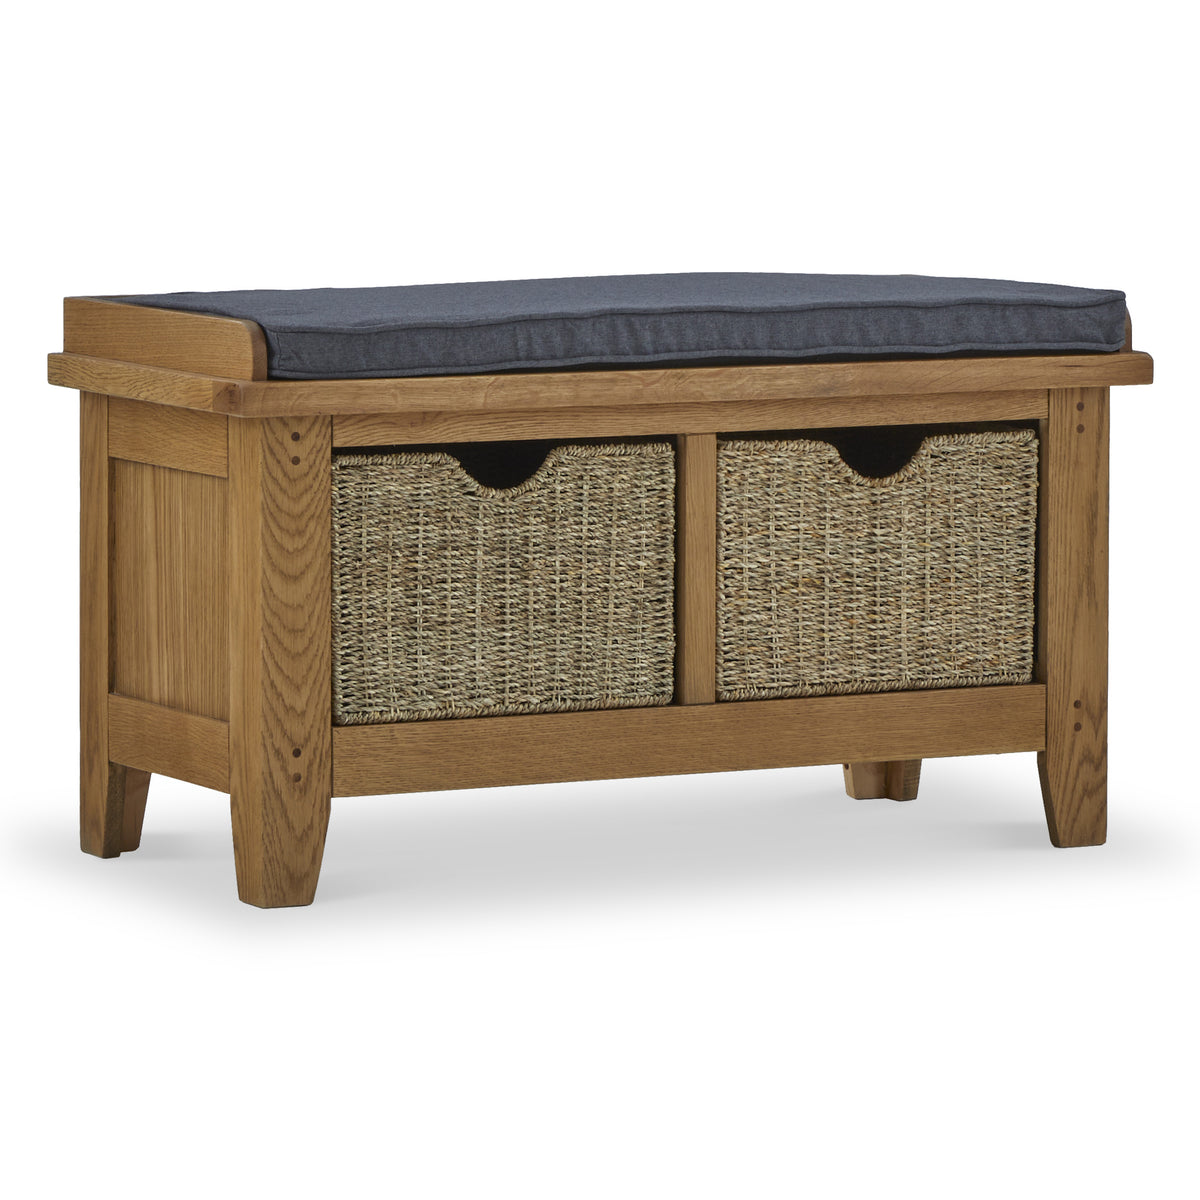 Broadway Oak Hallway Bench with Baskets from Roseland Furniture